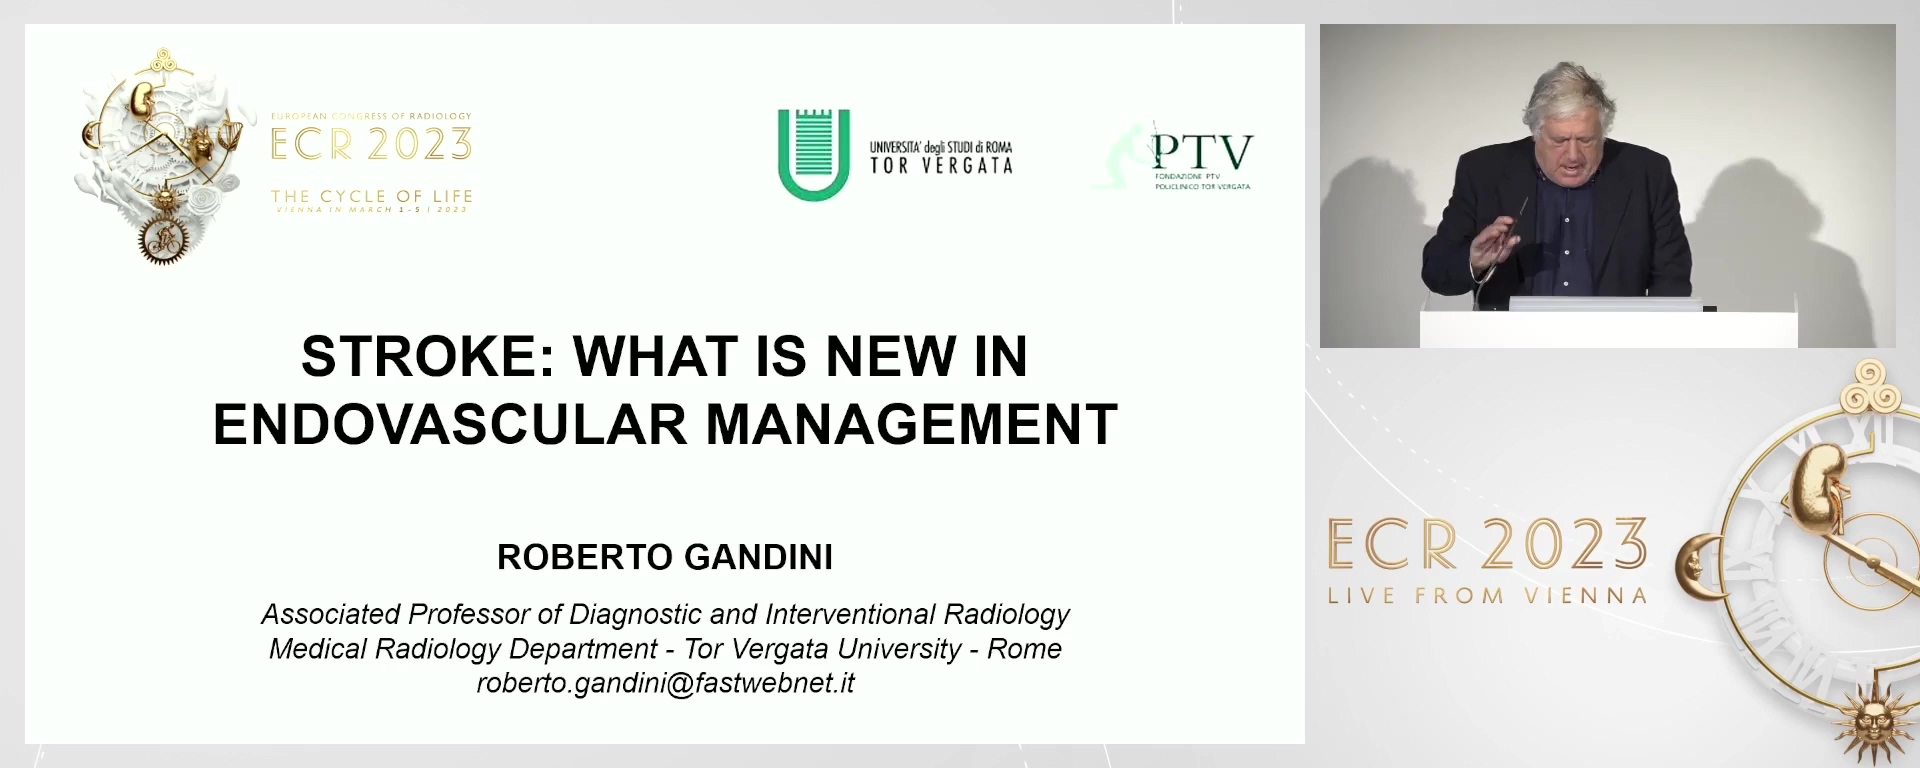 What is new in endovascular management